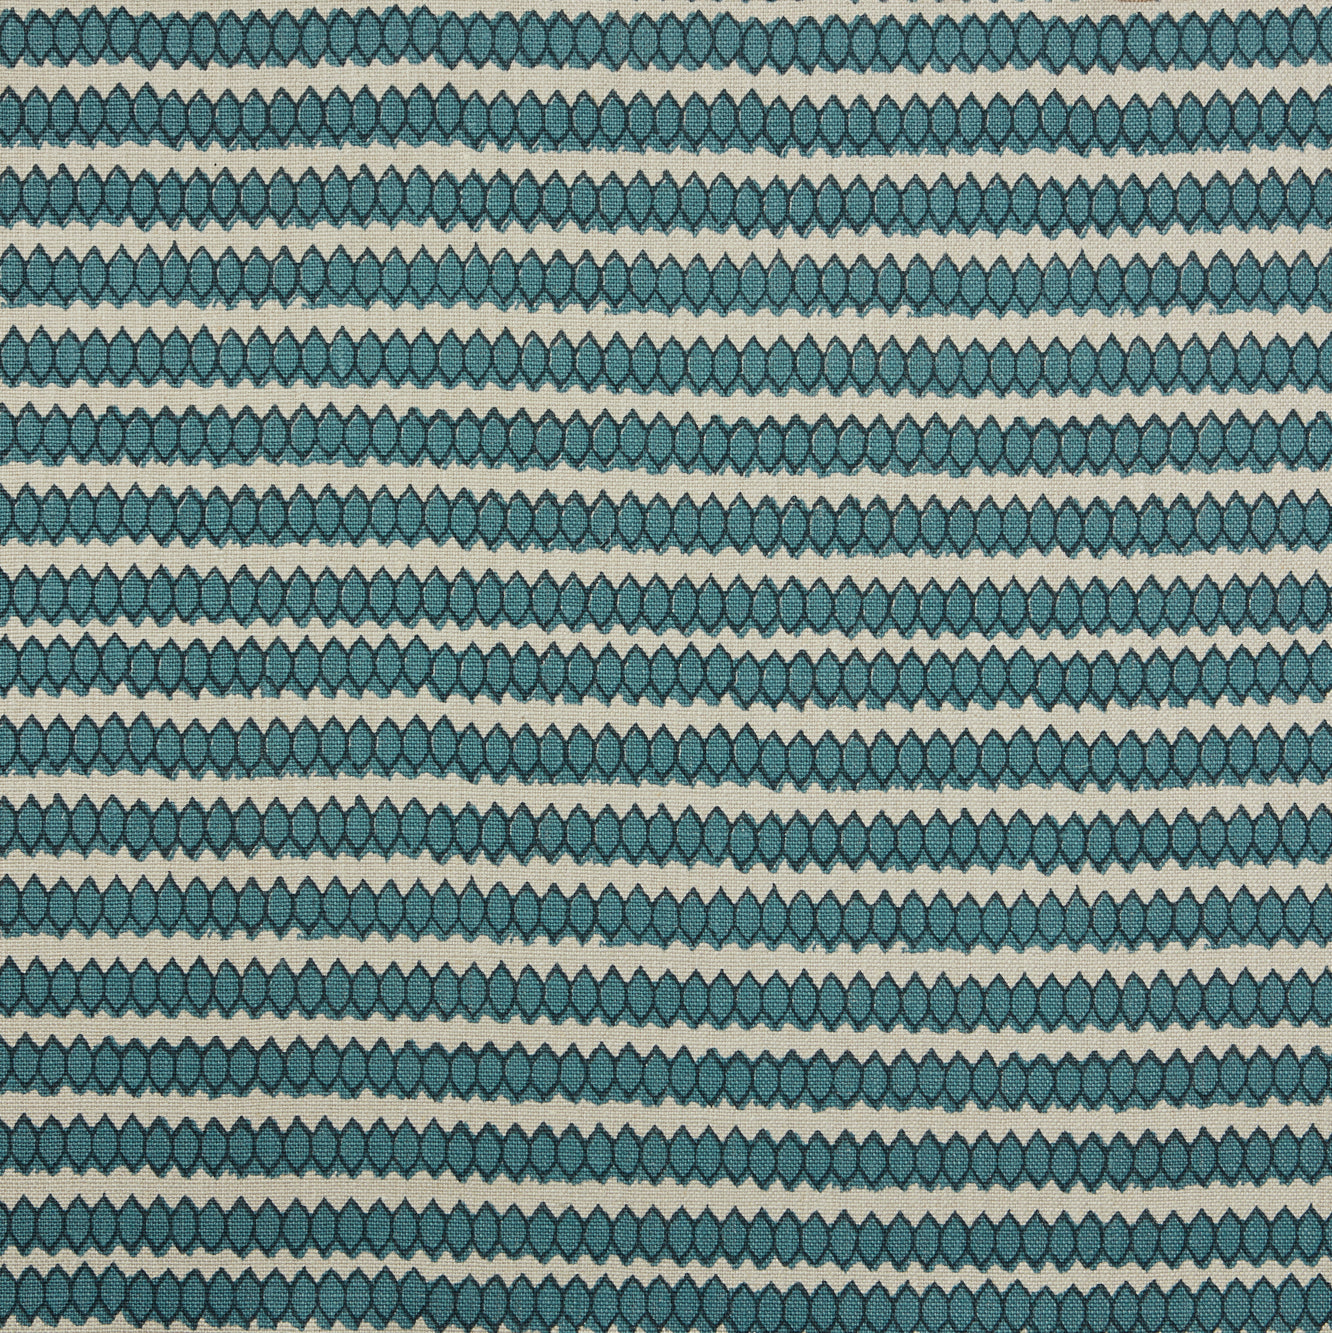 Swatch of fabric with rows of hand-drawn navy and turquoise honeycomb shapes on a cream background.